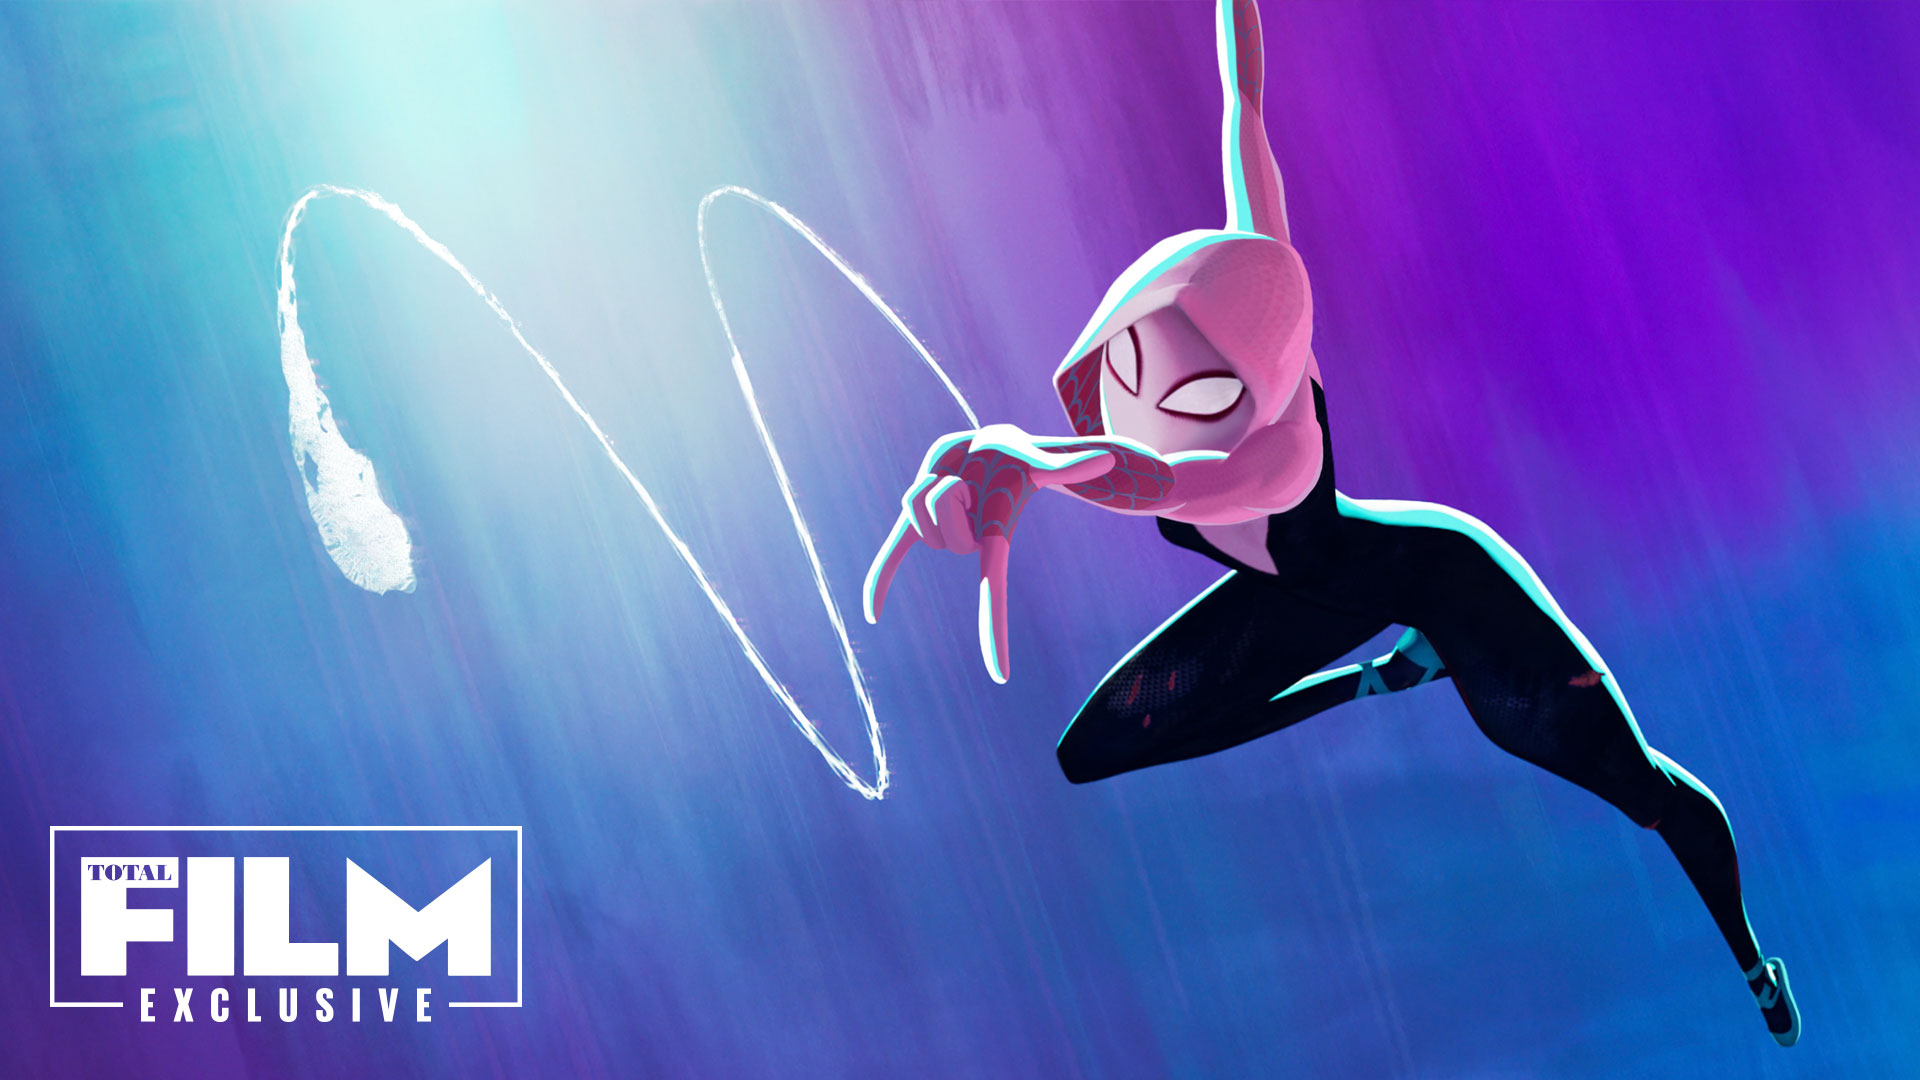 Spider-Man: Across the Spider-Verse' Trailer Introduces the Spider